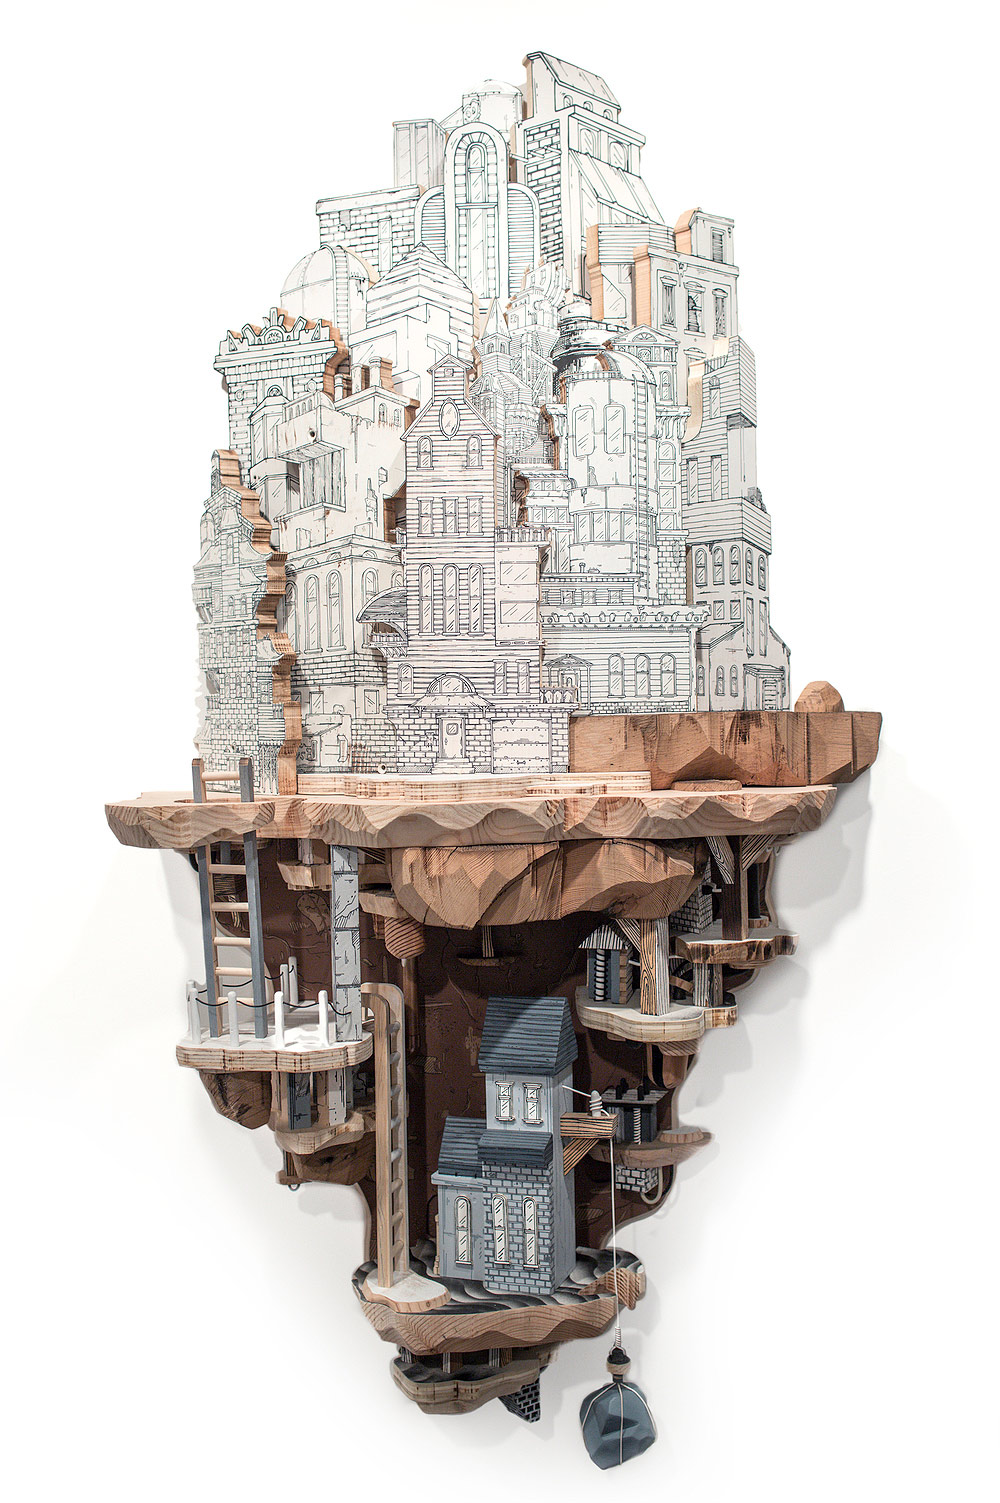 Extraordinary cities made from a combination of drawings and sculptures by Luke O’Sullivan